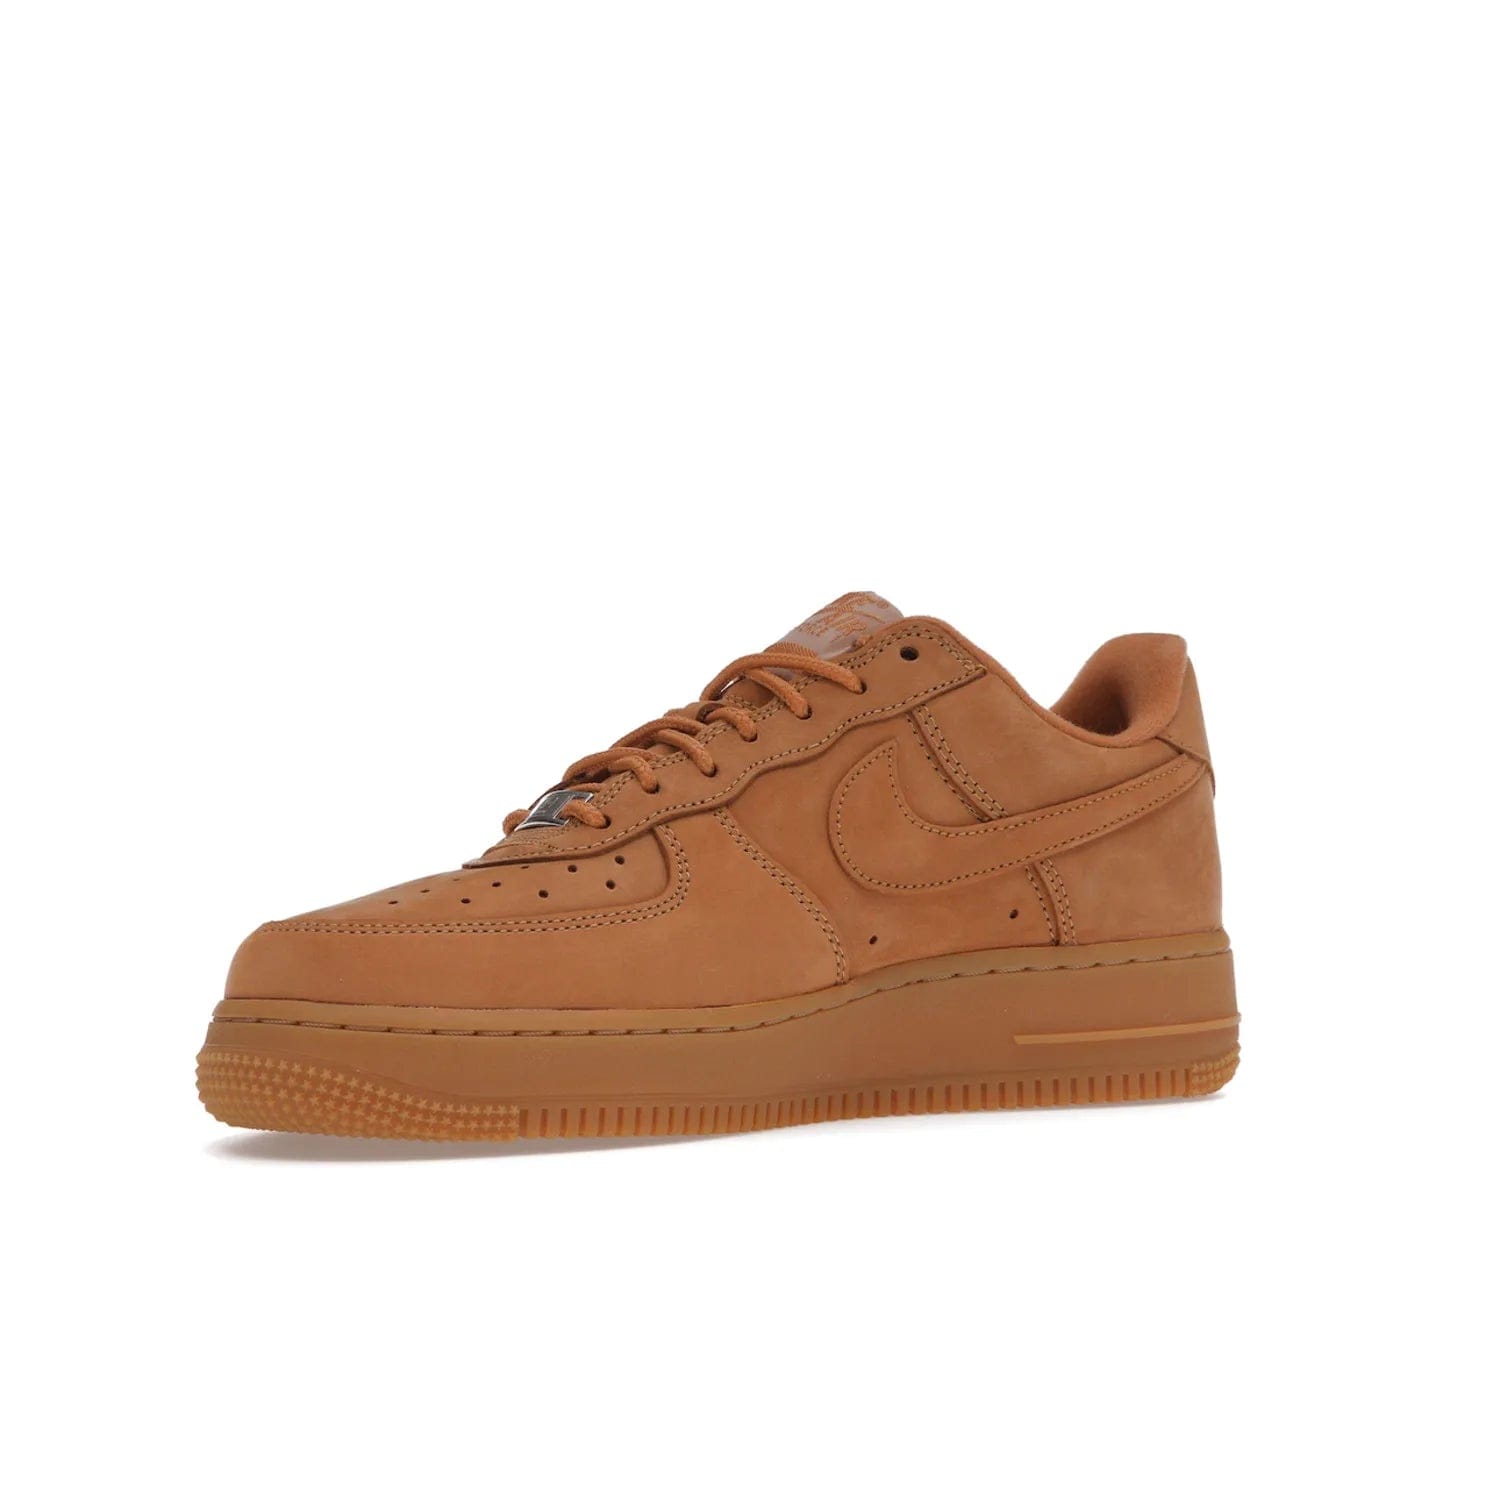 Nike Air Force 1 Low SP Supreme Wheat - Image 16 - Only at www.BallersClubKickz.com - A luxe Flax Durabuck upper and Supreme Box Logo insignias on the lateral heels make the Nike Air Force 1 Low SP Supreme Wheat a stylish lifestyle shoe. Matching Flax Air sole adds a classic touch to this collaboration between Nike and Supreme. Make a statement with this edition of the classic Air Force 1 Low.